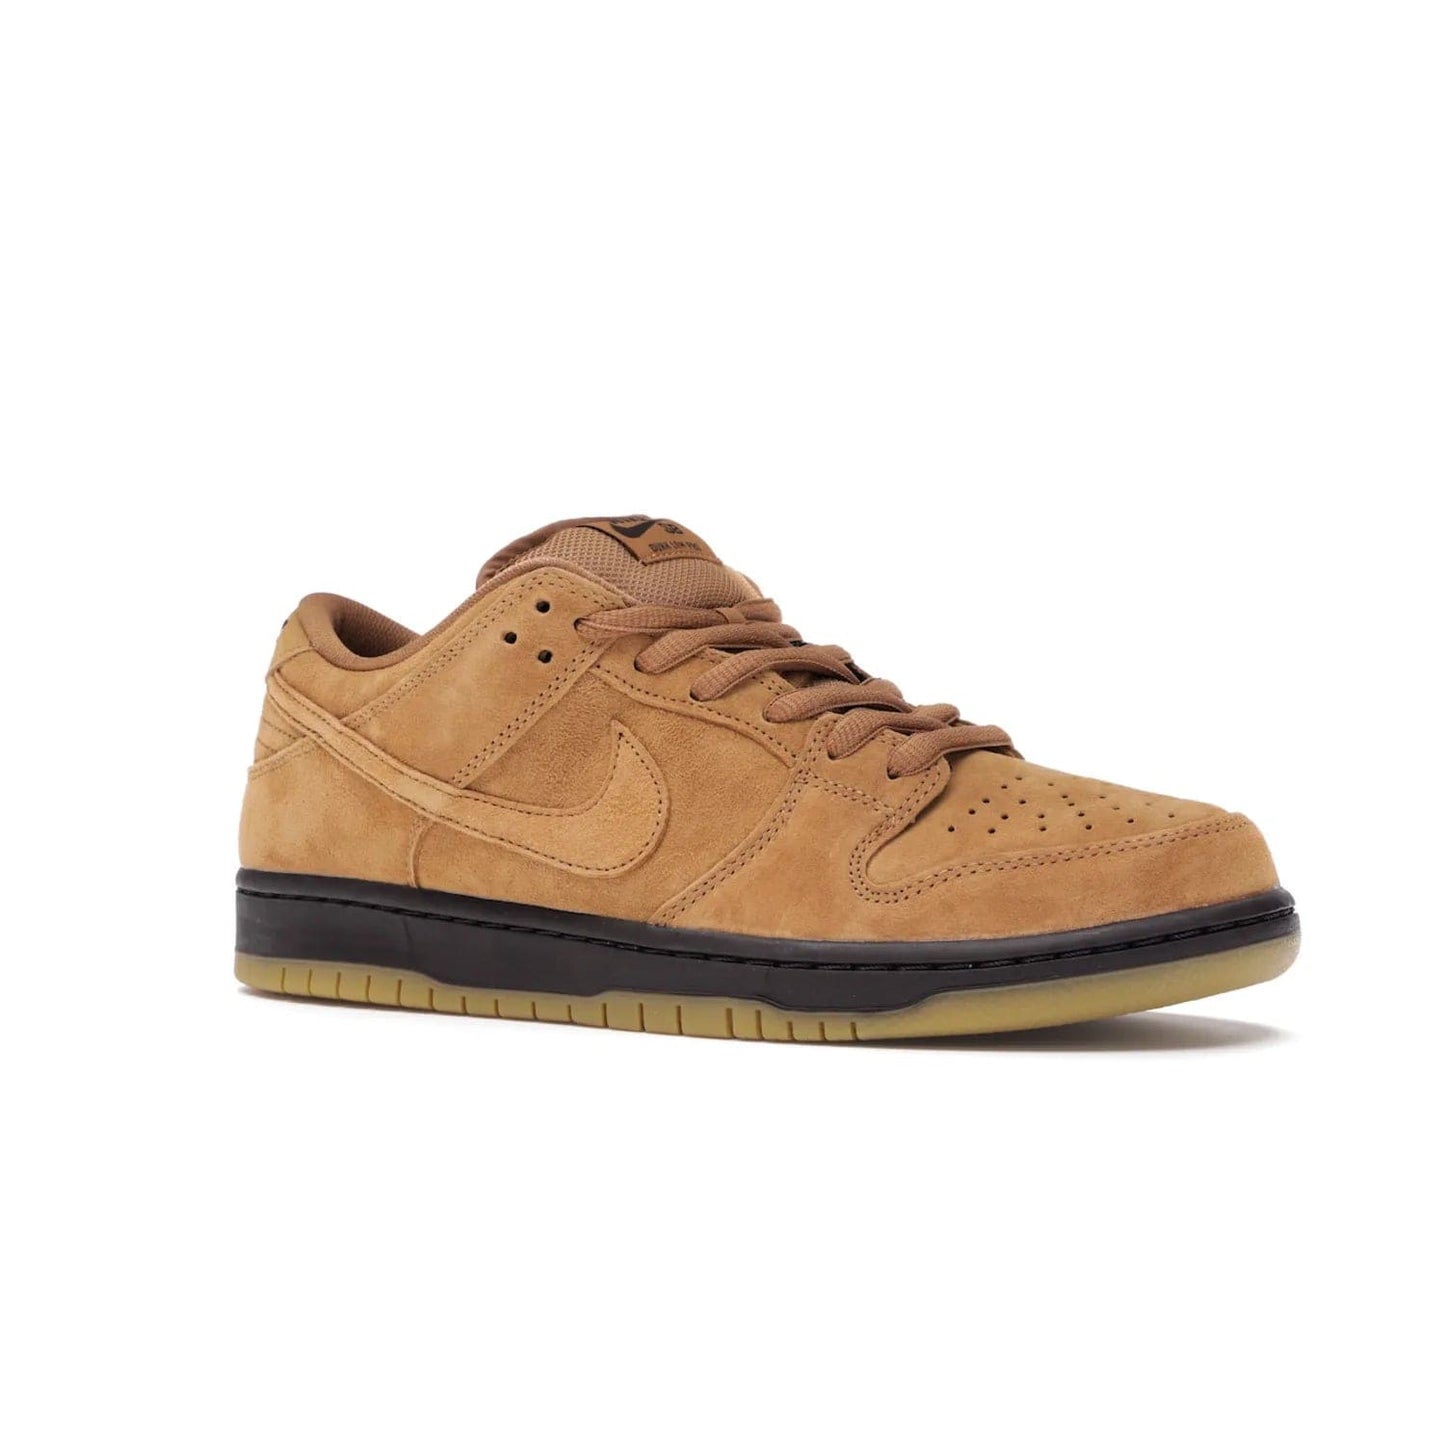 Nike SB Dunk Low Wheat (2021/2023) - Image 4 - Only at www.BallersClubKickz.com - The Nike SB Dunk Low Wheat (2021/2023)has a sleek silhouette and wheat suede upper. Tan tones for lining, mesh tongues, and laces. Iconic color palette midsole, perforated boxing toe. Brown branding on tongue and heel. Gum rubber outsole with partitioned pattern for traction. Eschewed in Feb 2021 for $110.